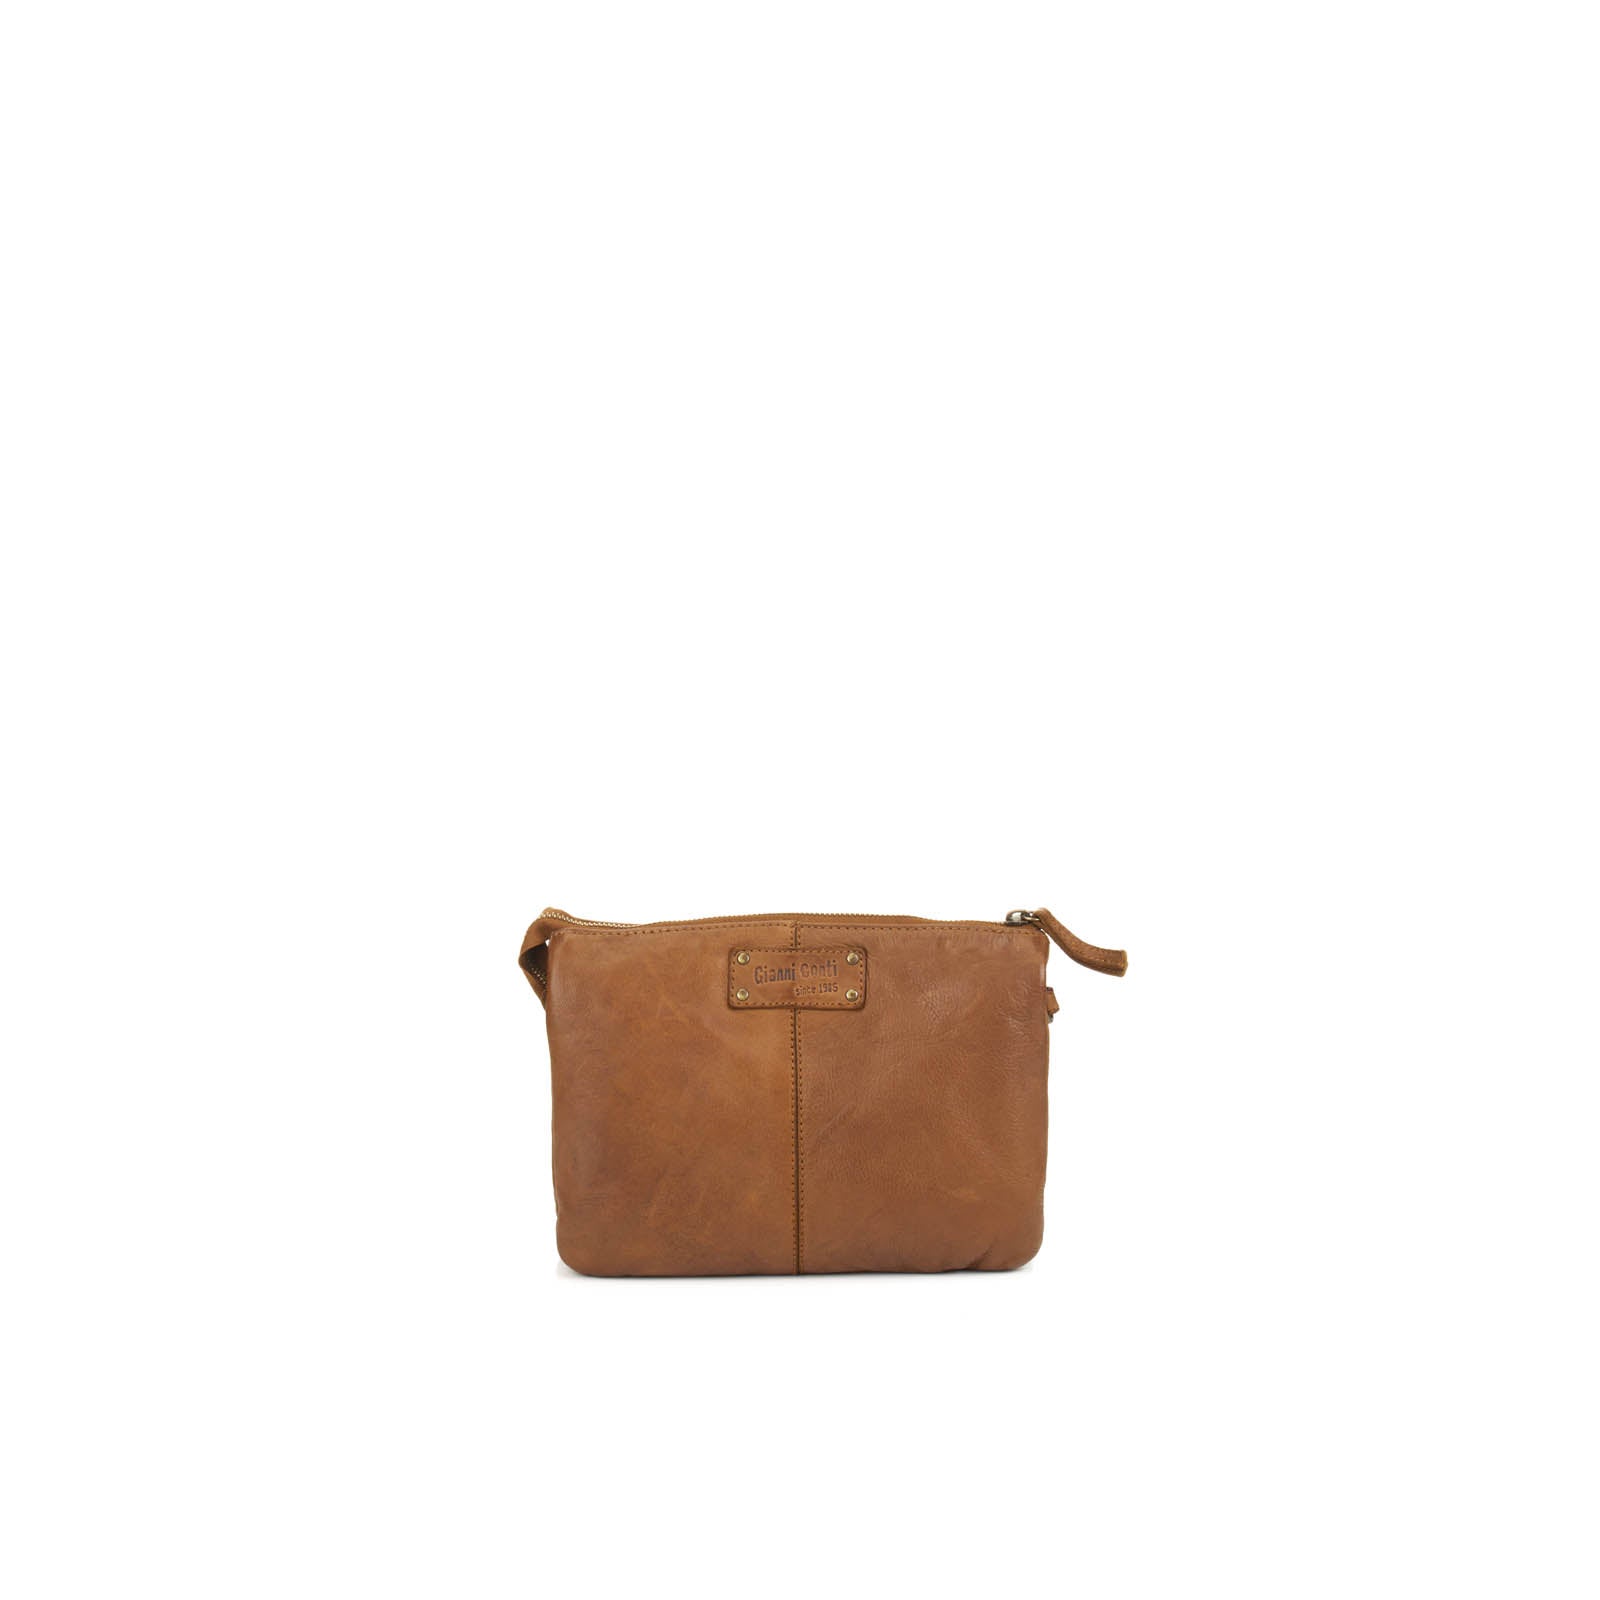 Small brown leather crossbody bag with zipper closure